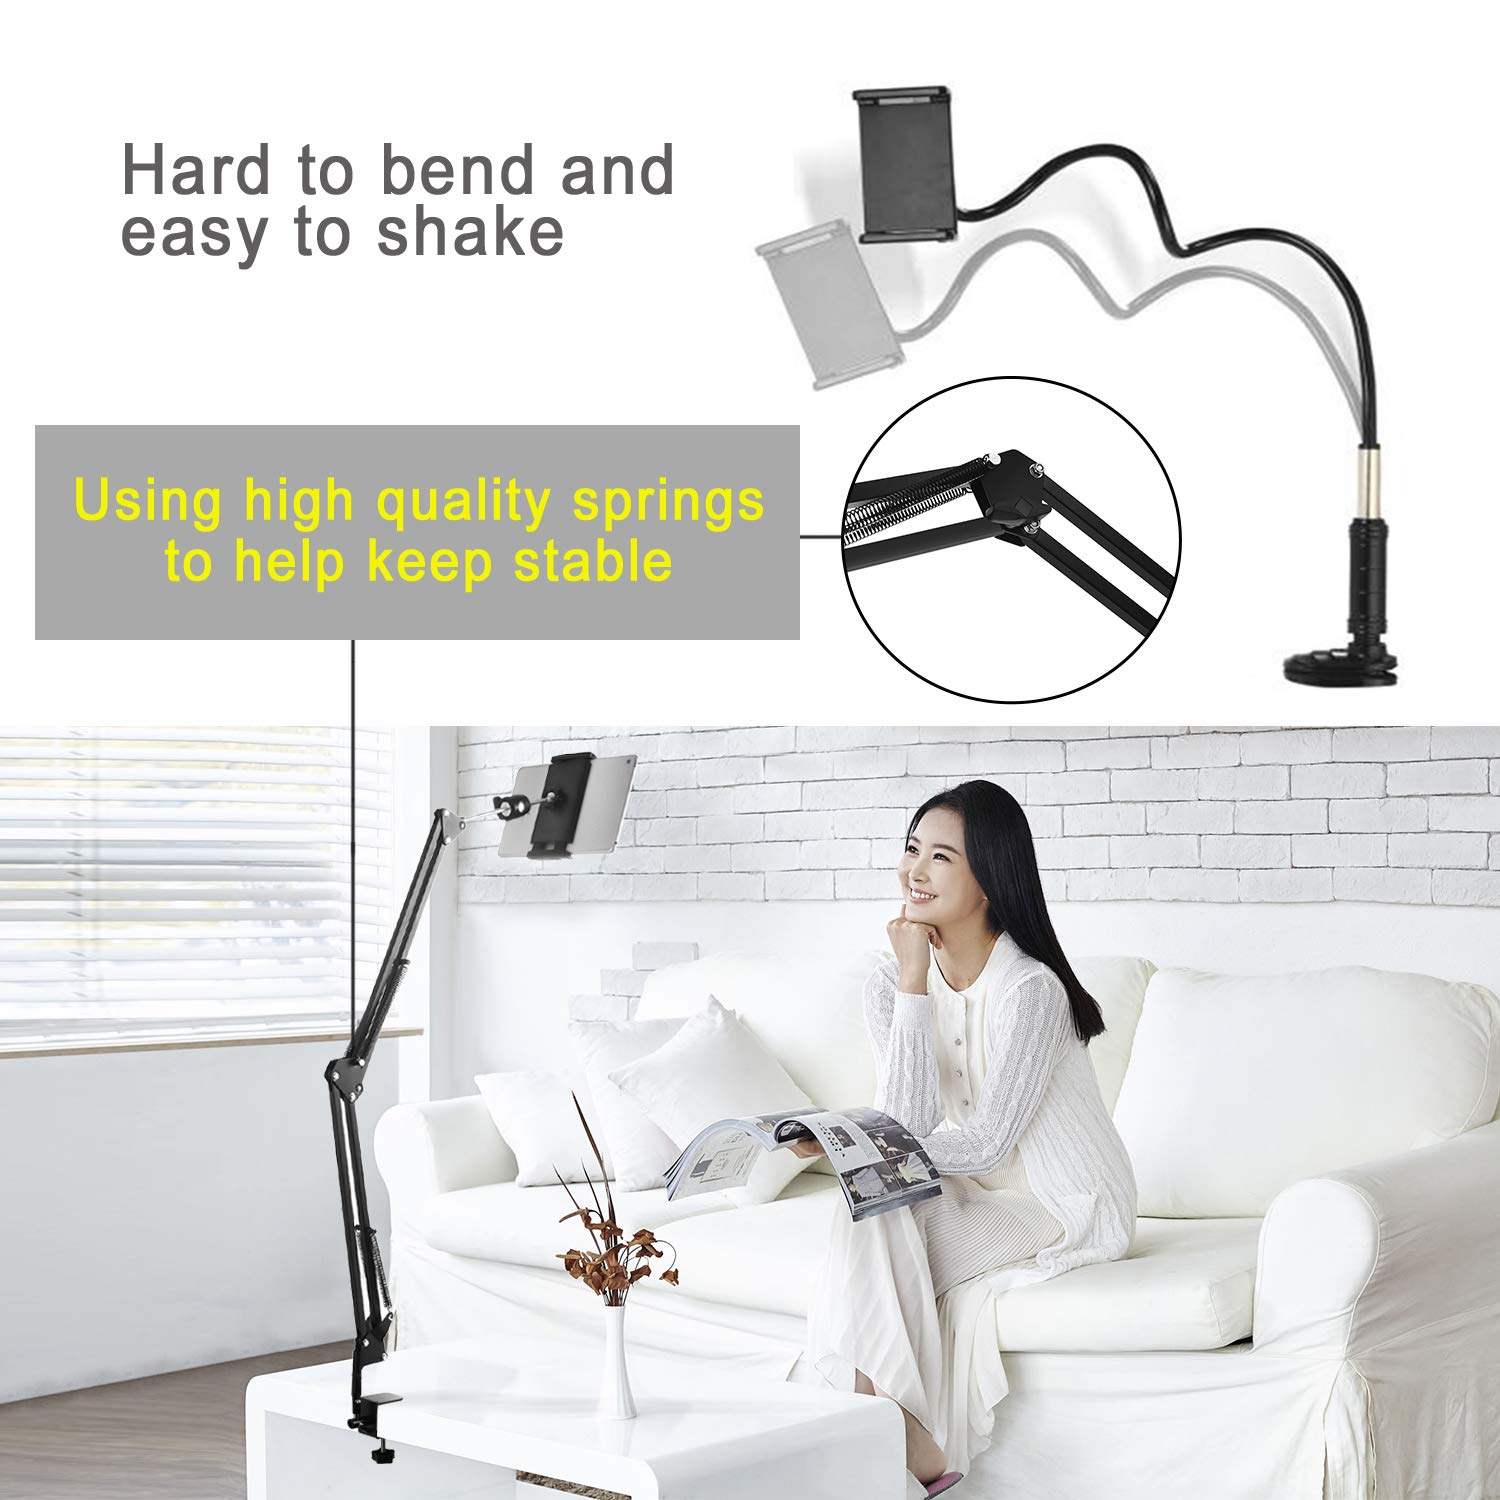 ipad holder for bed,360 Degree Rotating tablet holder for bed with Aluminum Arm for iPad,iPhoneXS, N-Switch, Kindle Fire,or Other 4.5~12.9 inch Devices